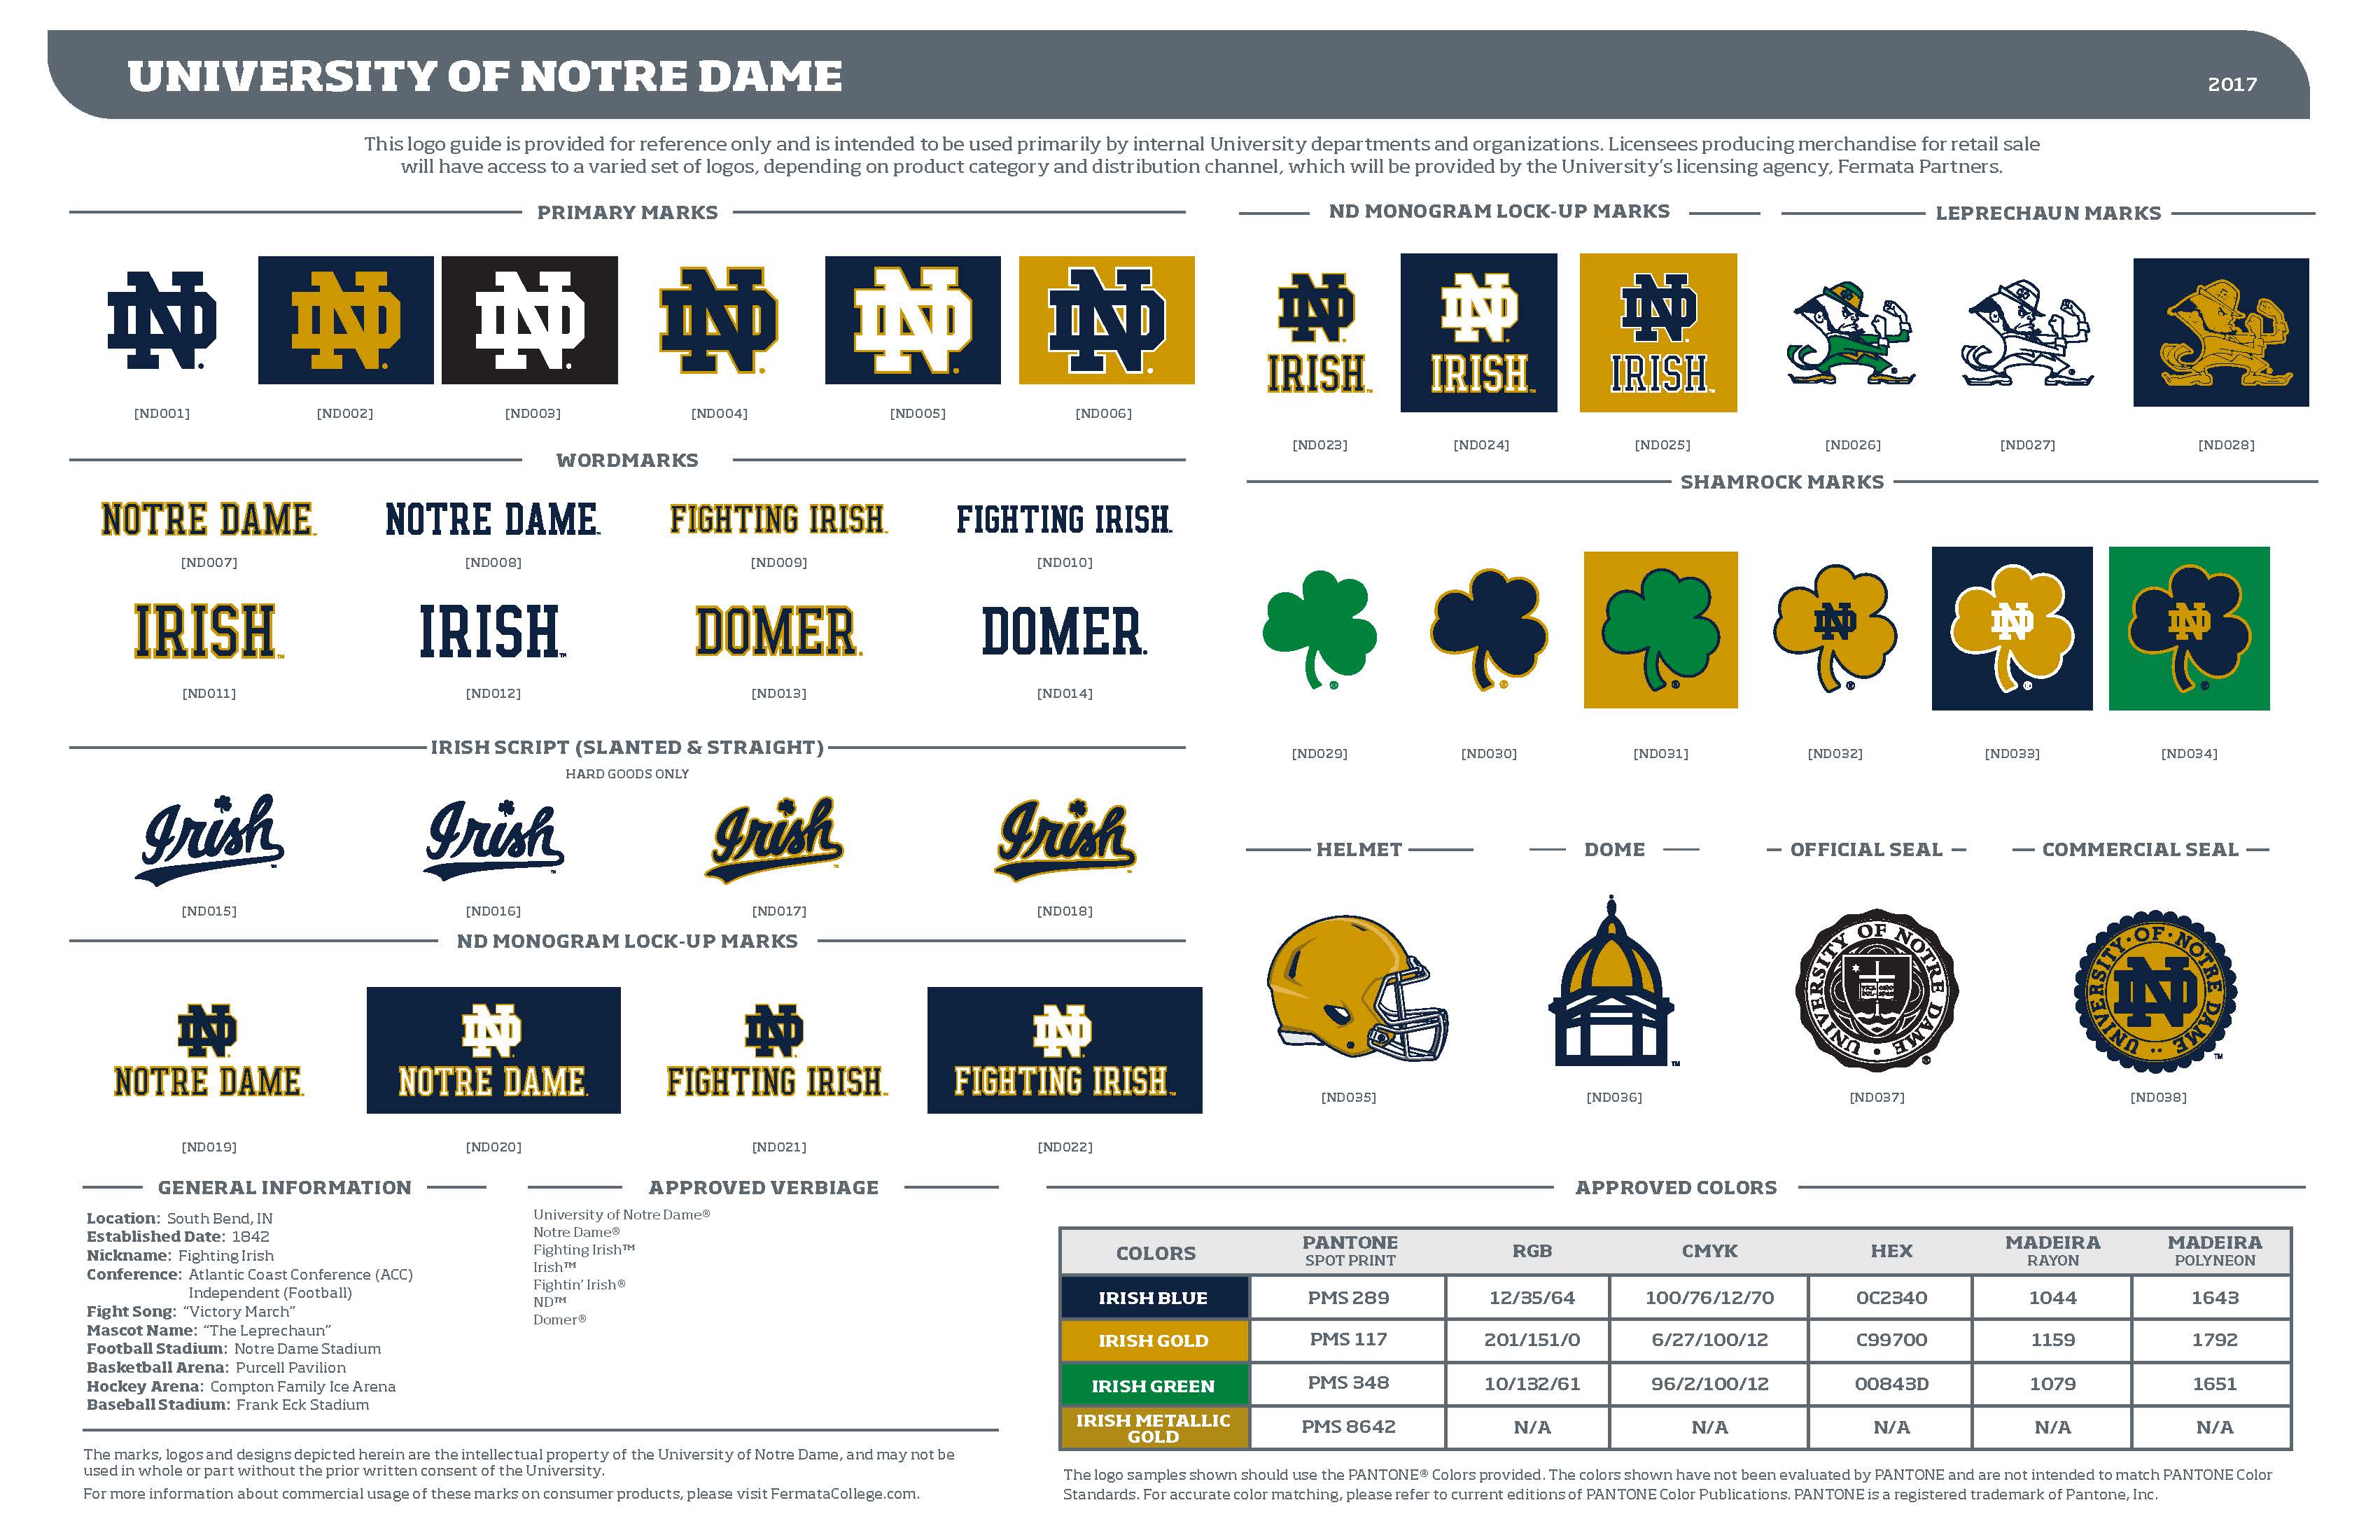 University of Notre Dame Logo - Logos and Trademarks // Licensing // University of Notre Dame